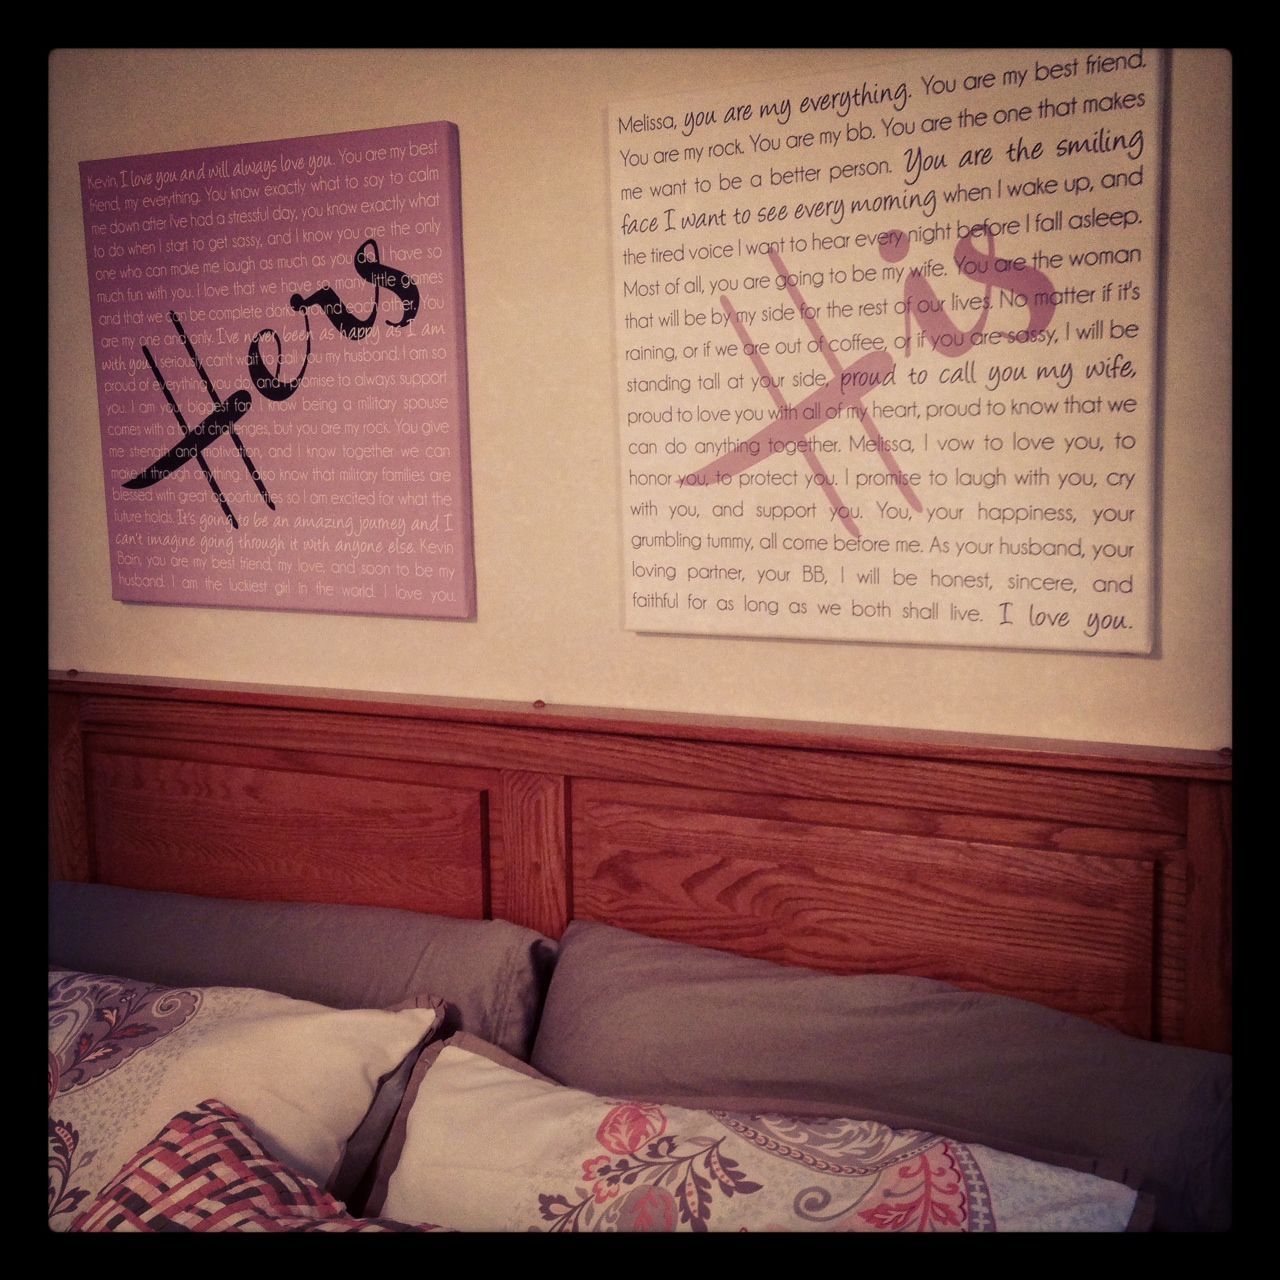 HERS & HIS Wedding Vows Art over the bed decor. in smaller form that would be cool